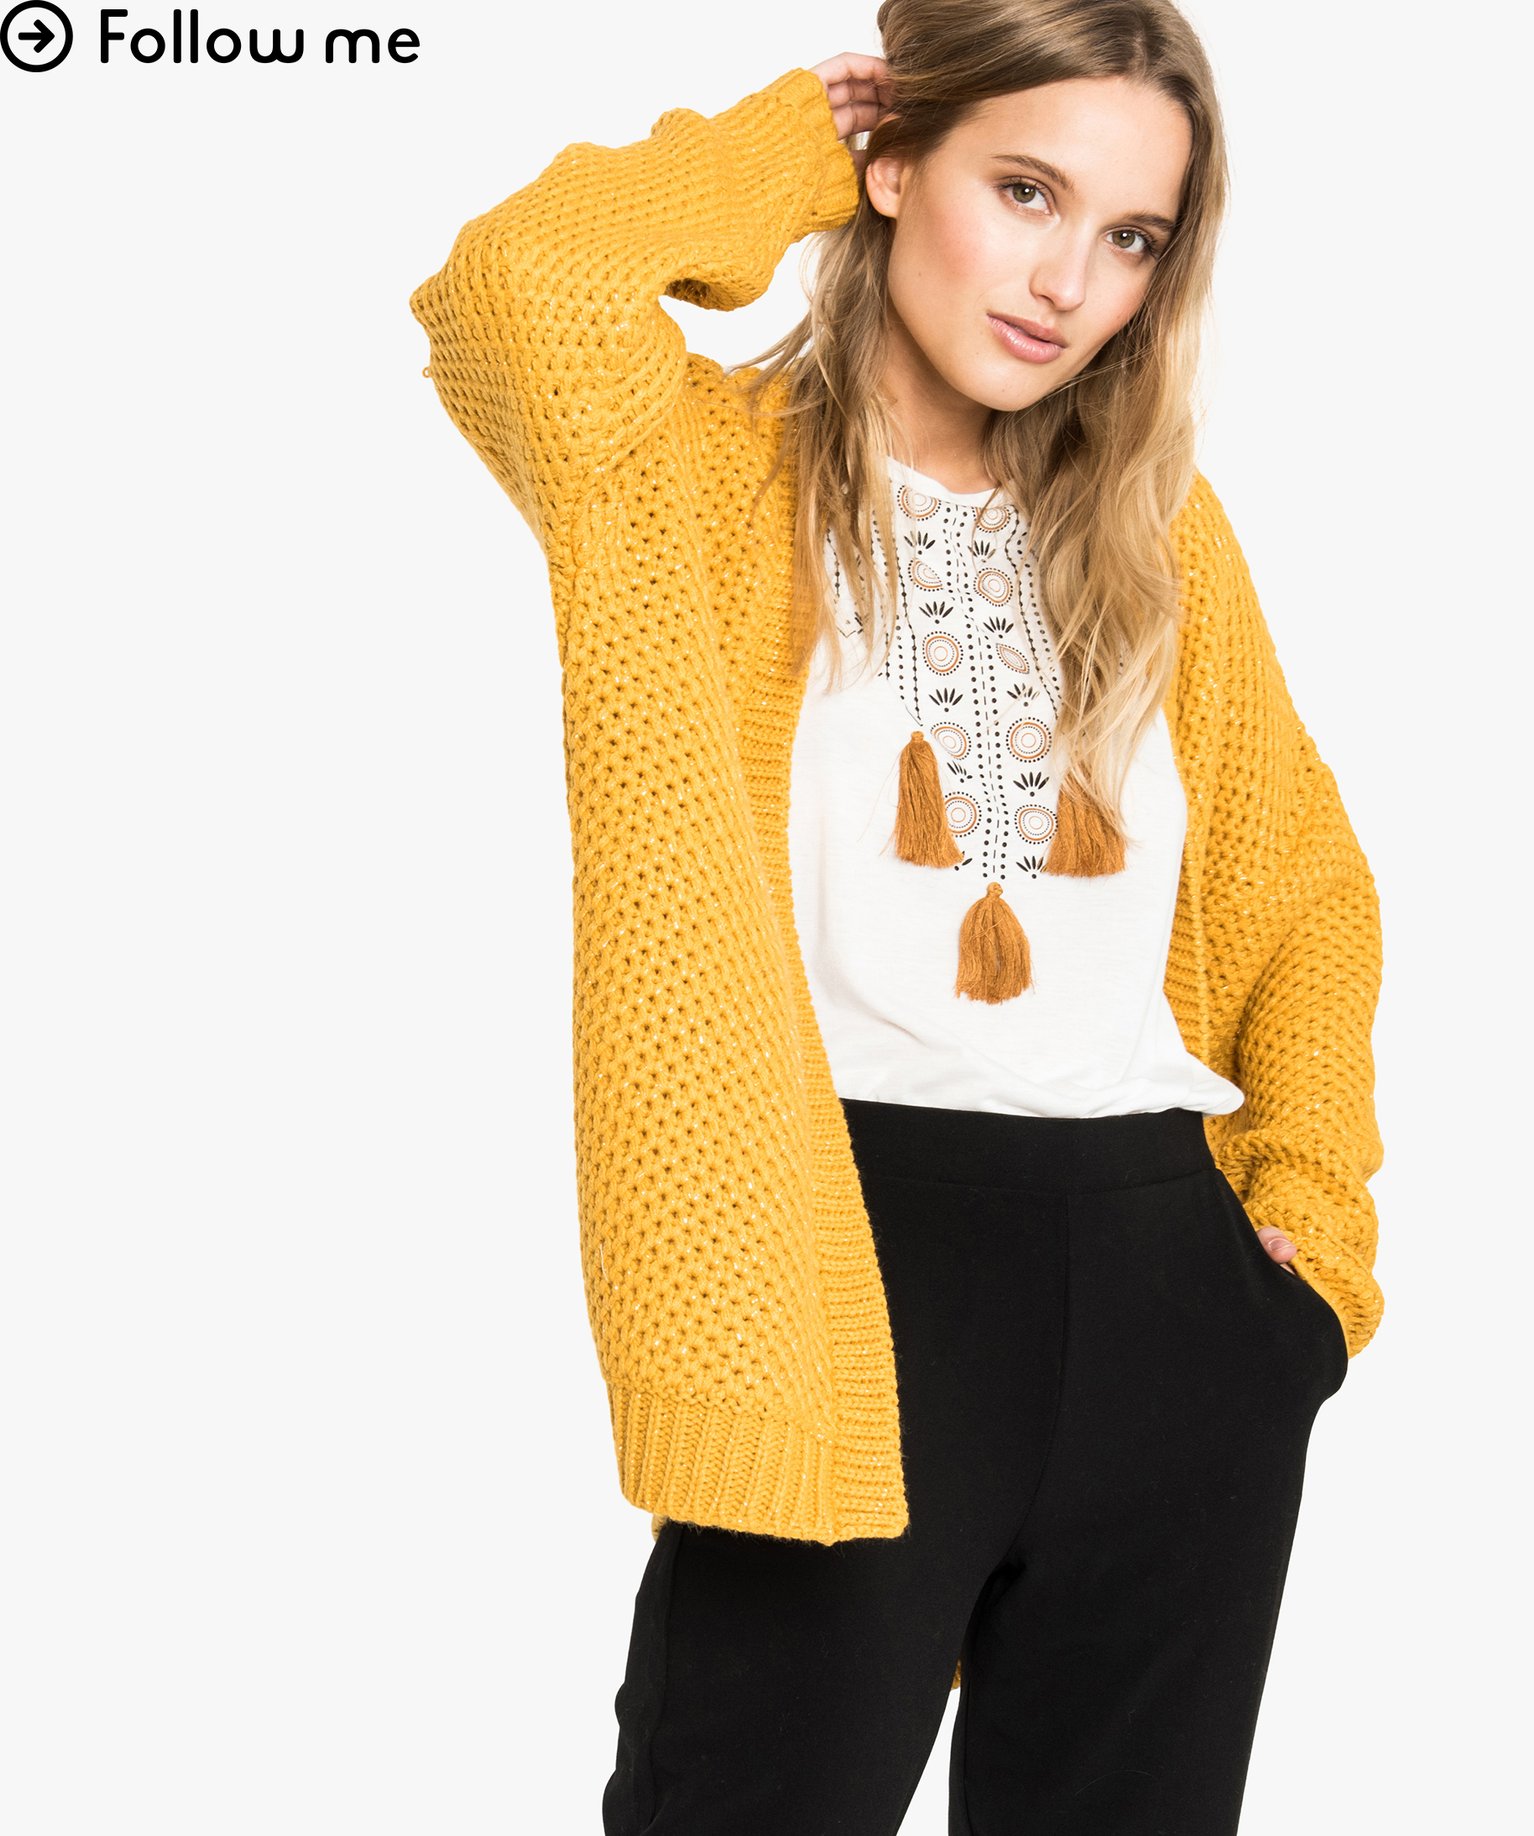 gilet maille jaune moutarde